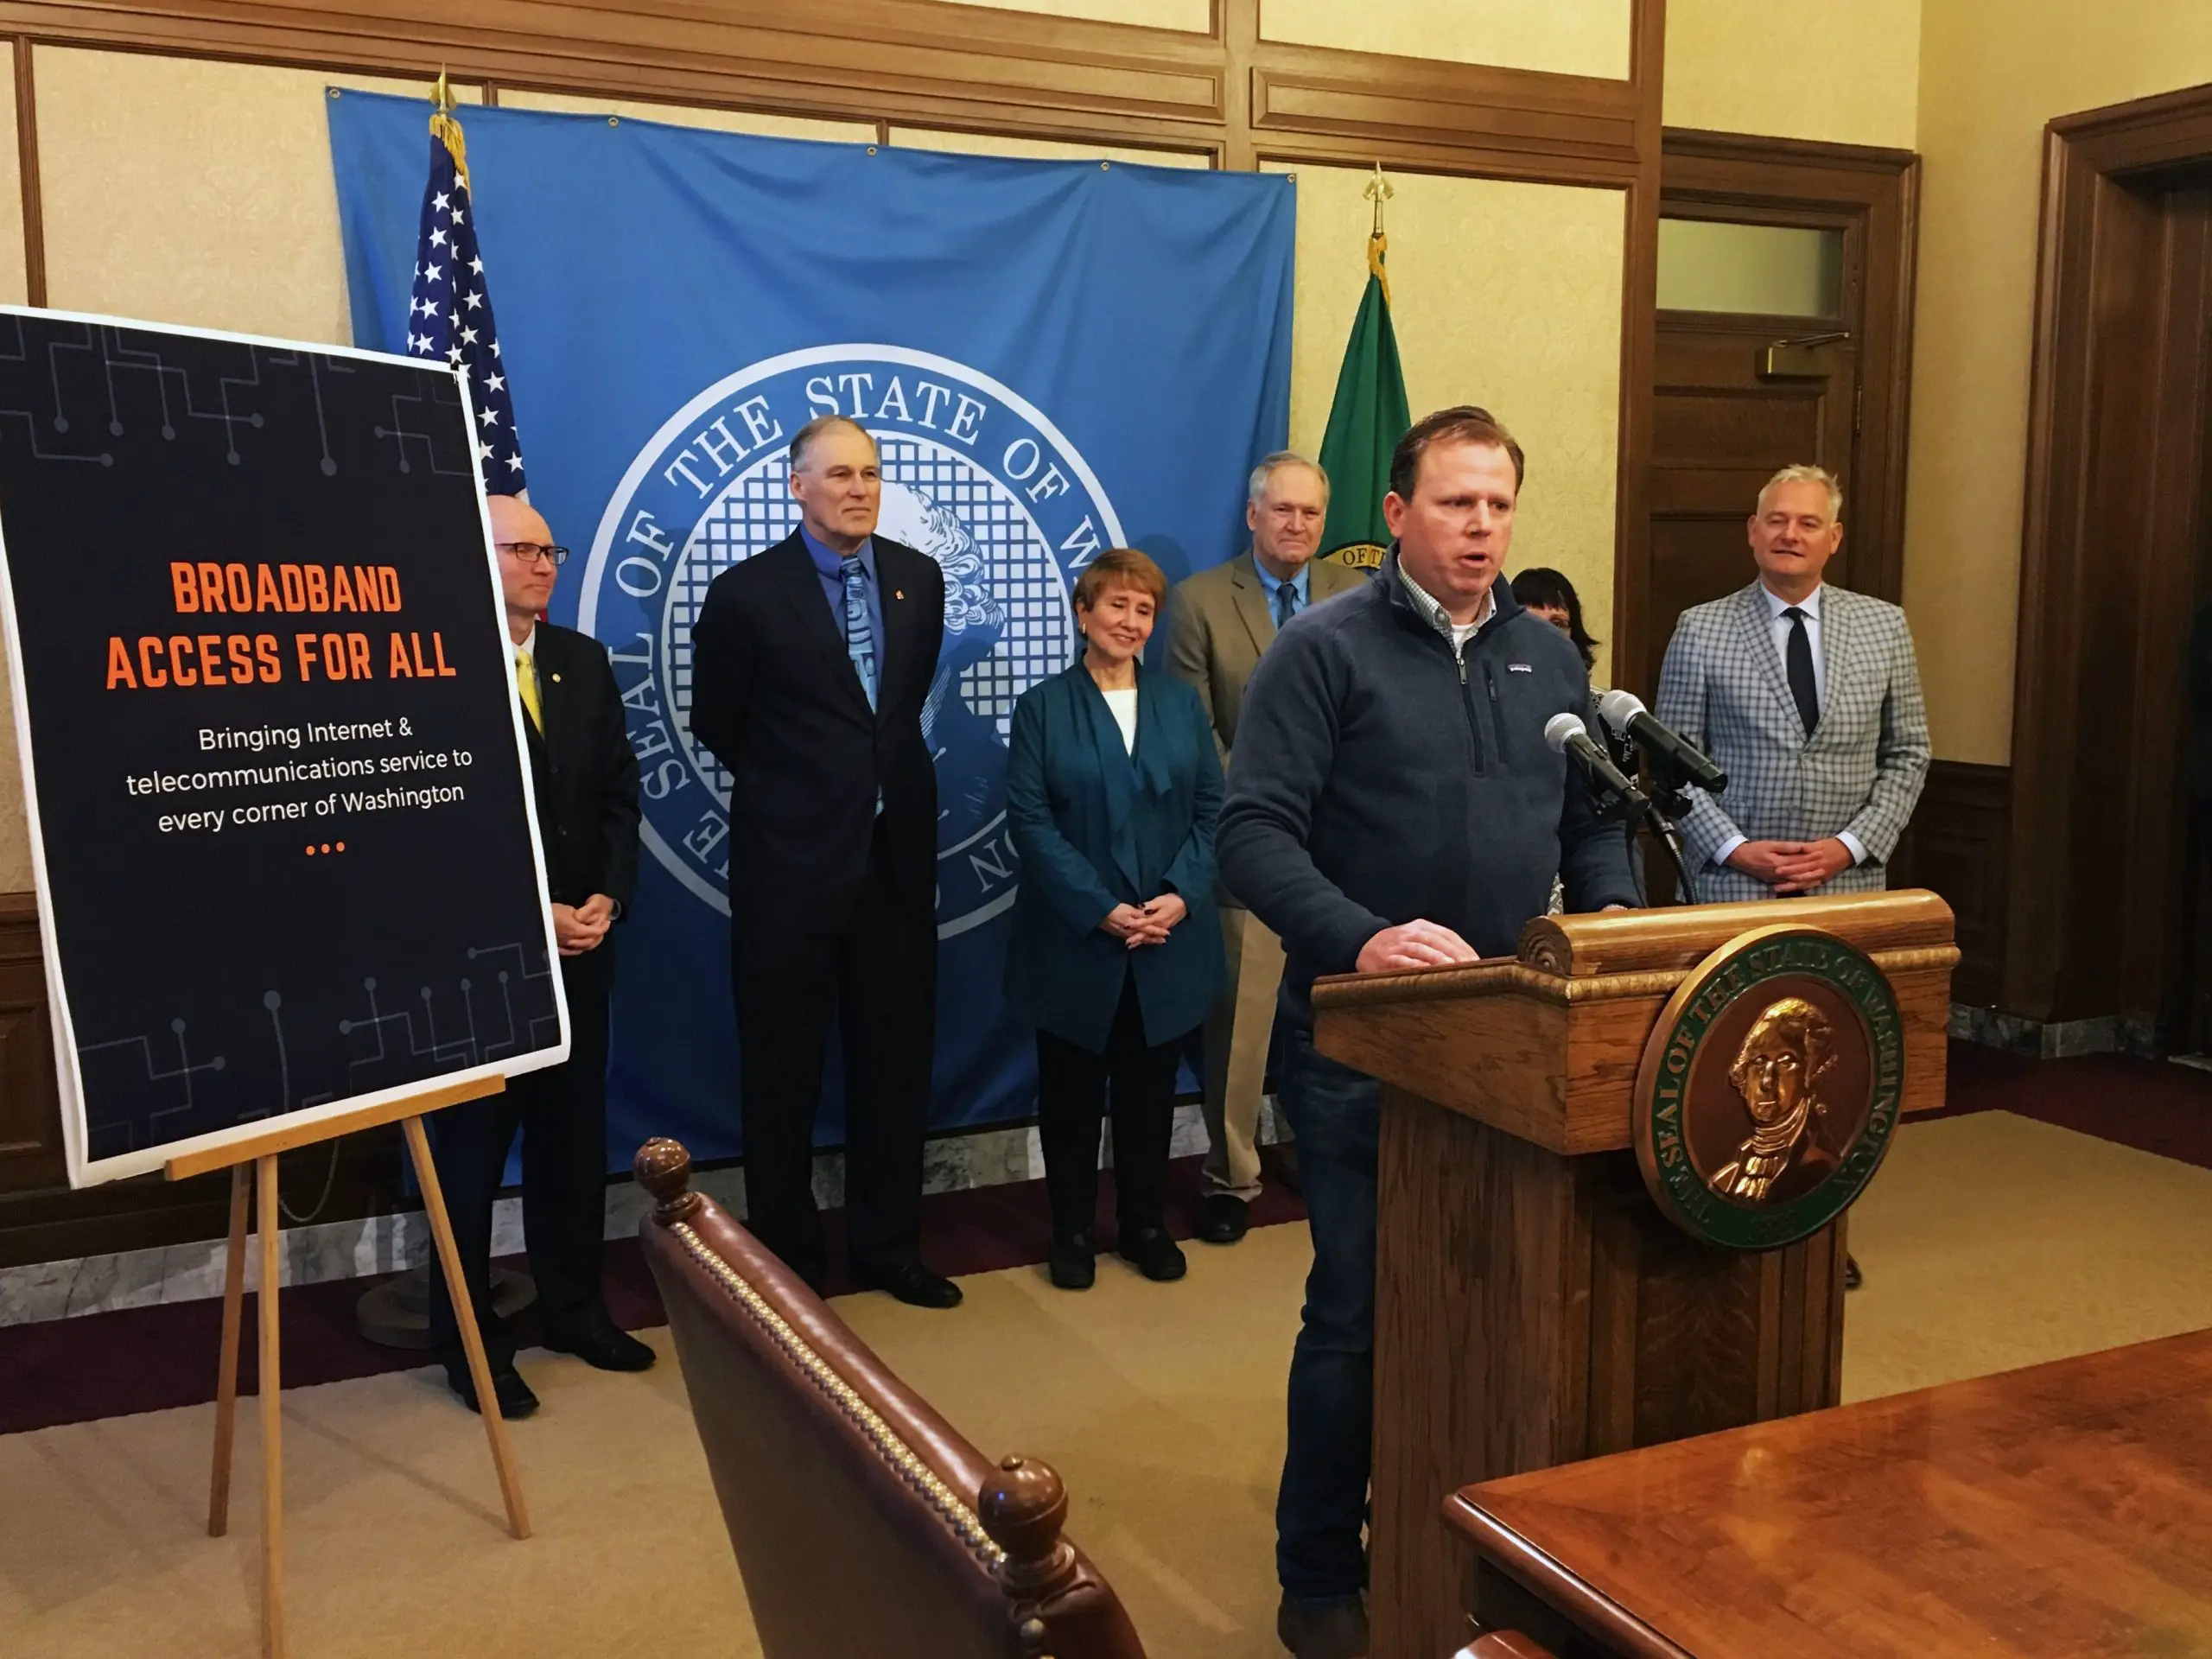 Inslee proposes broadband access for all